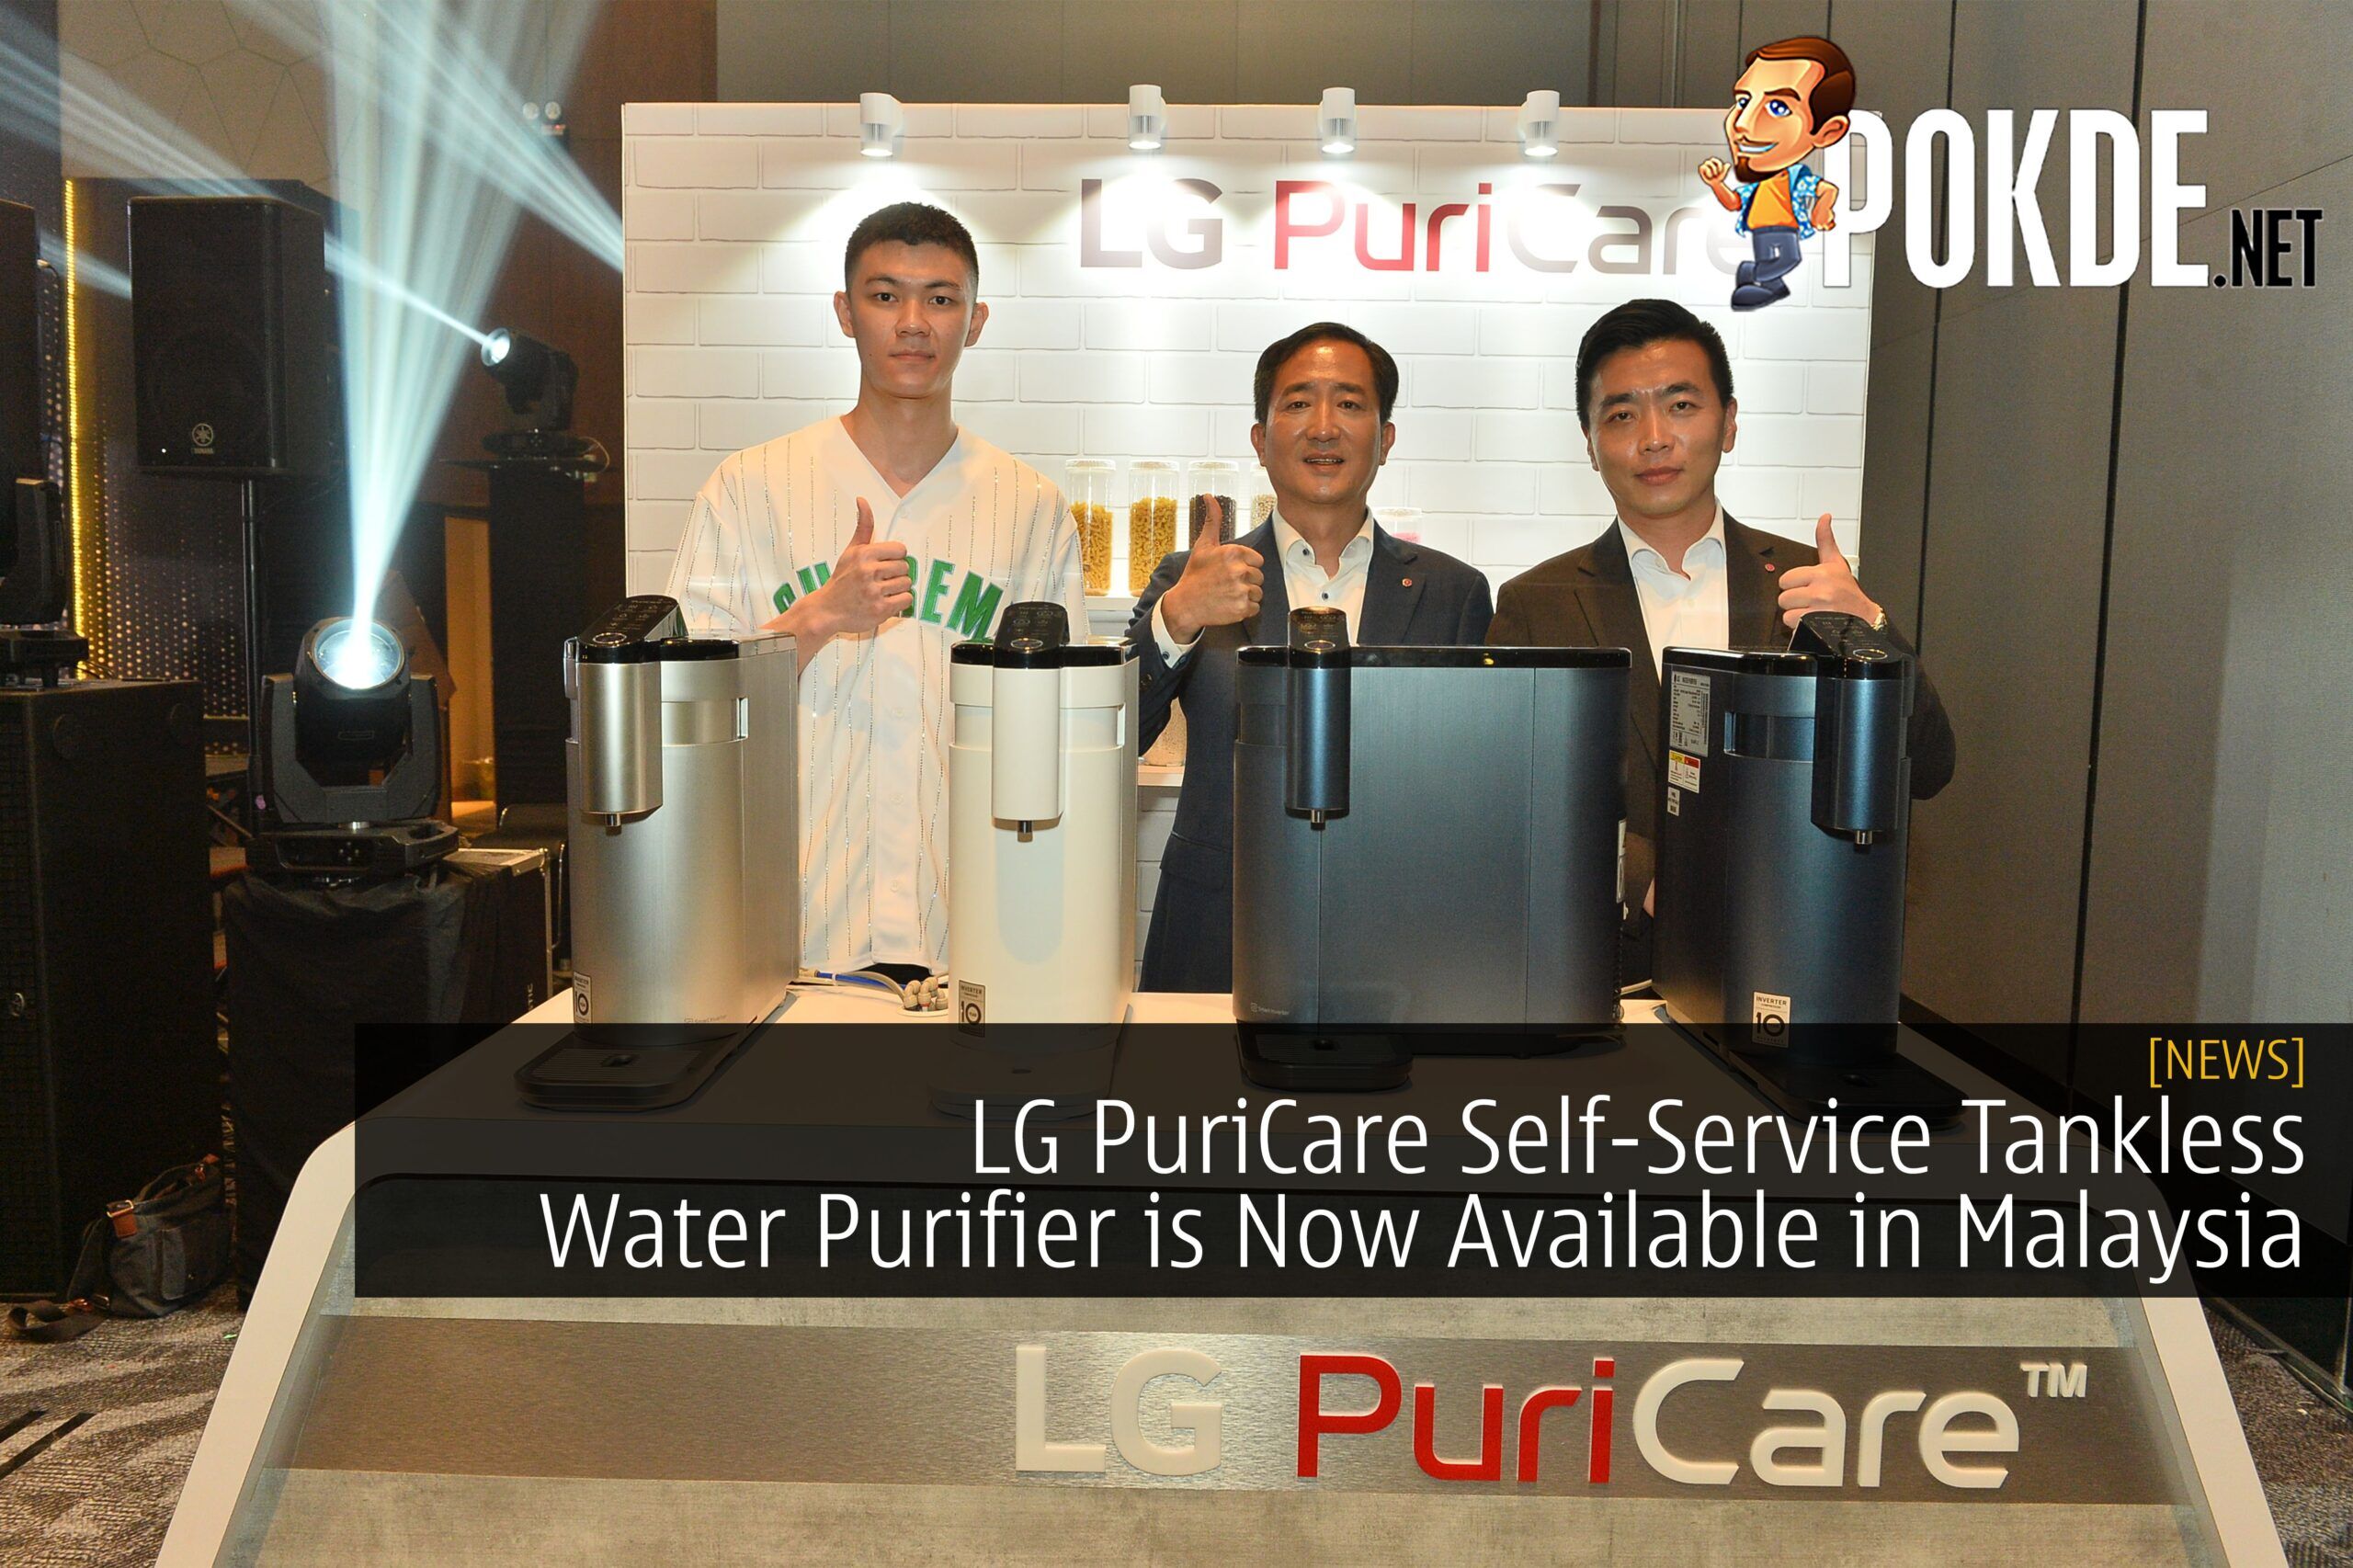 LG PuriCare Self-Service Tankless Water Purifier is Now Available in Malaysia